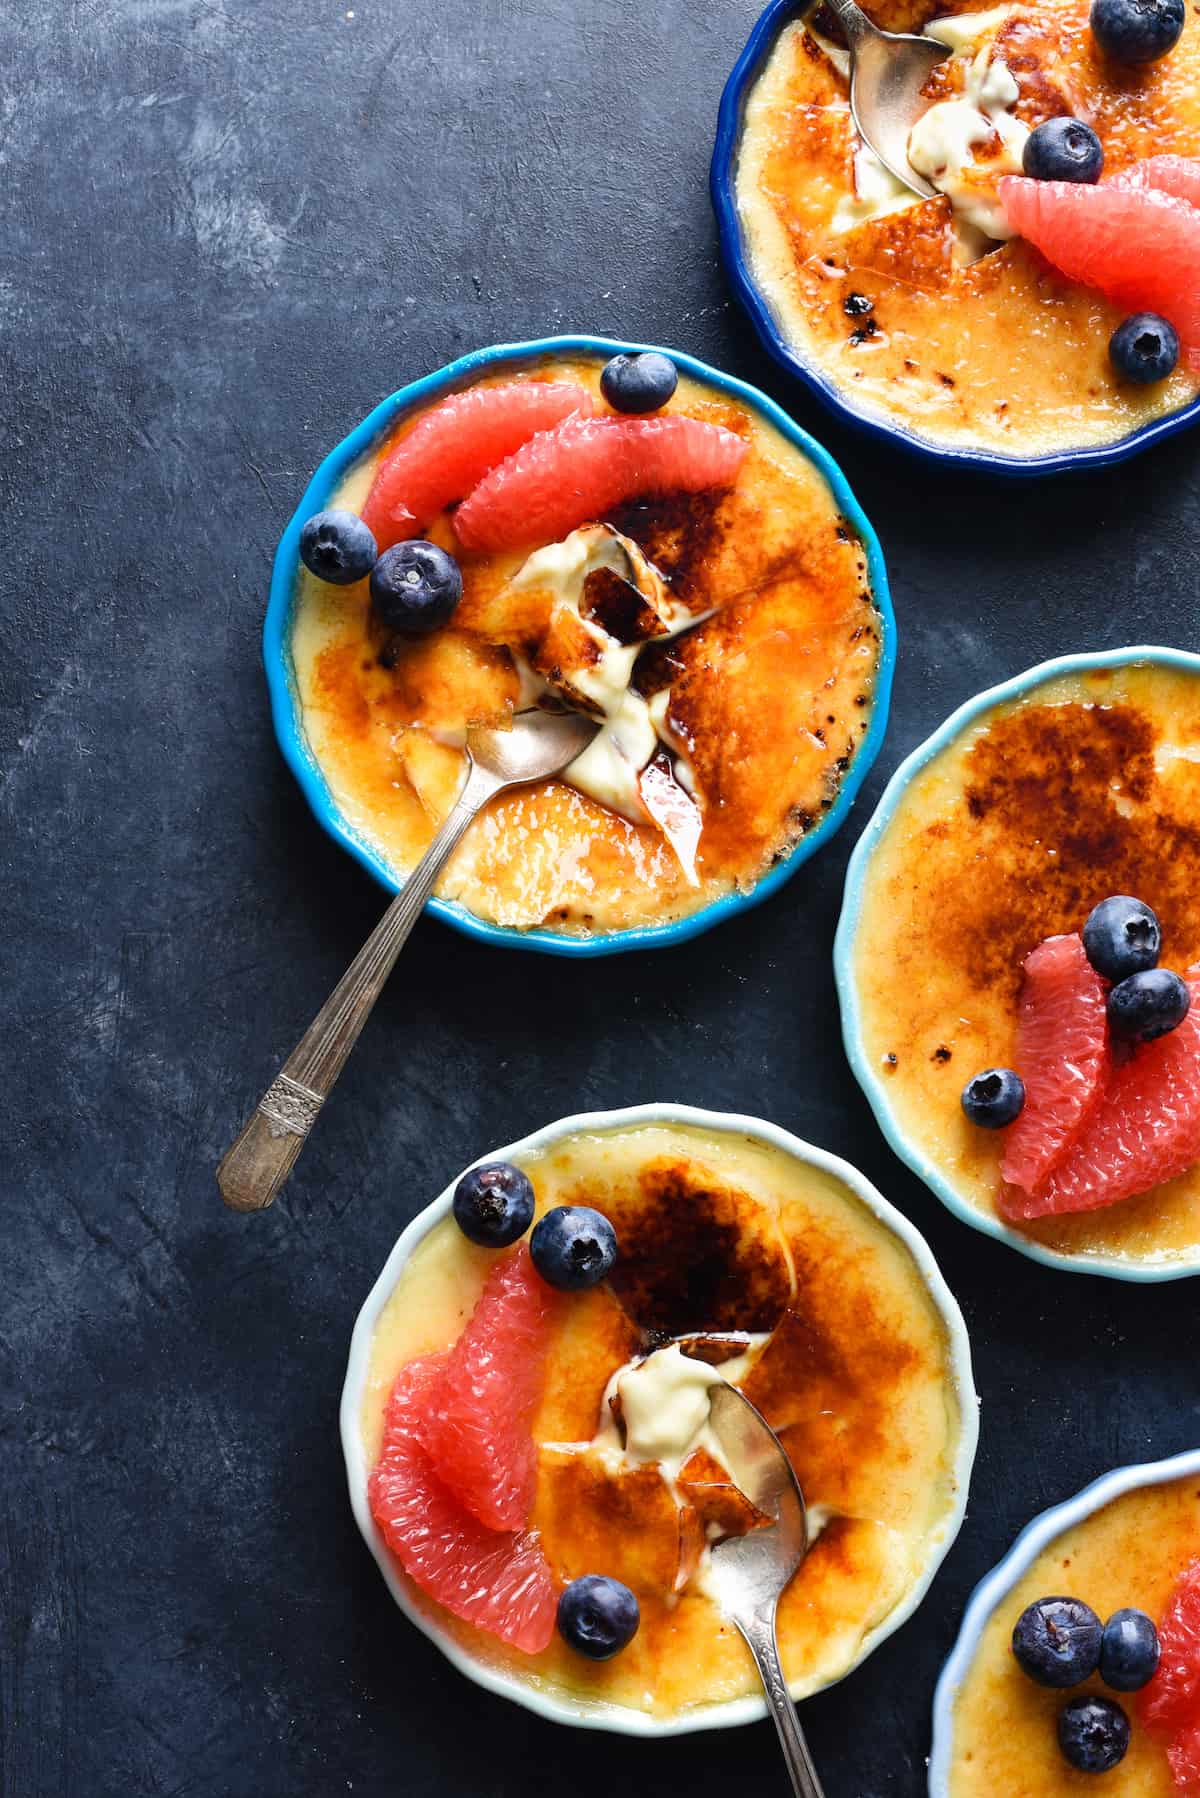 Grapefruit creme brulee in ramekins, garnished with grapefruit segments and blueberries, on a dark surface, with a spoons digging into them.